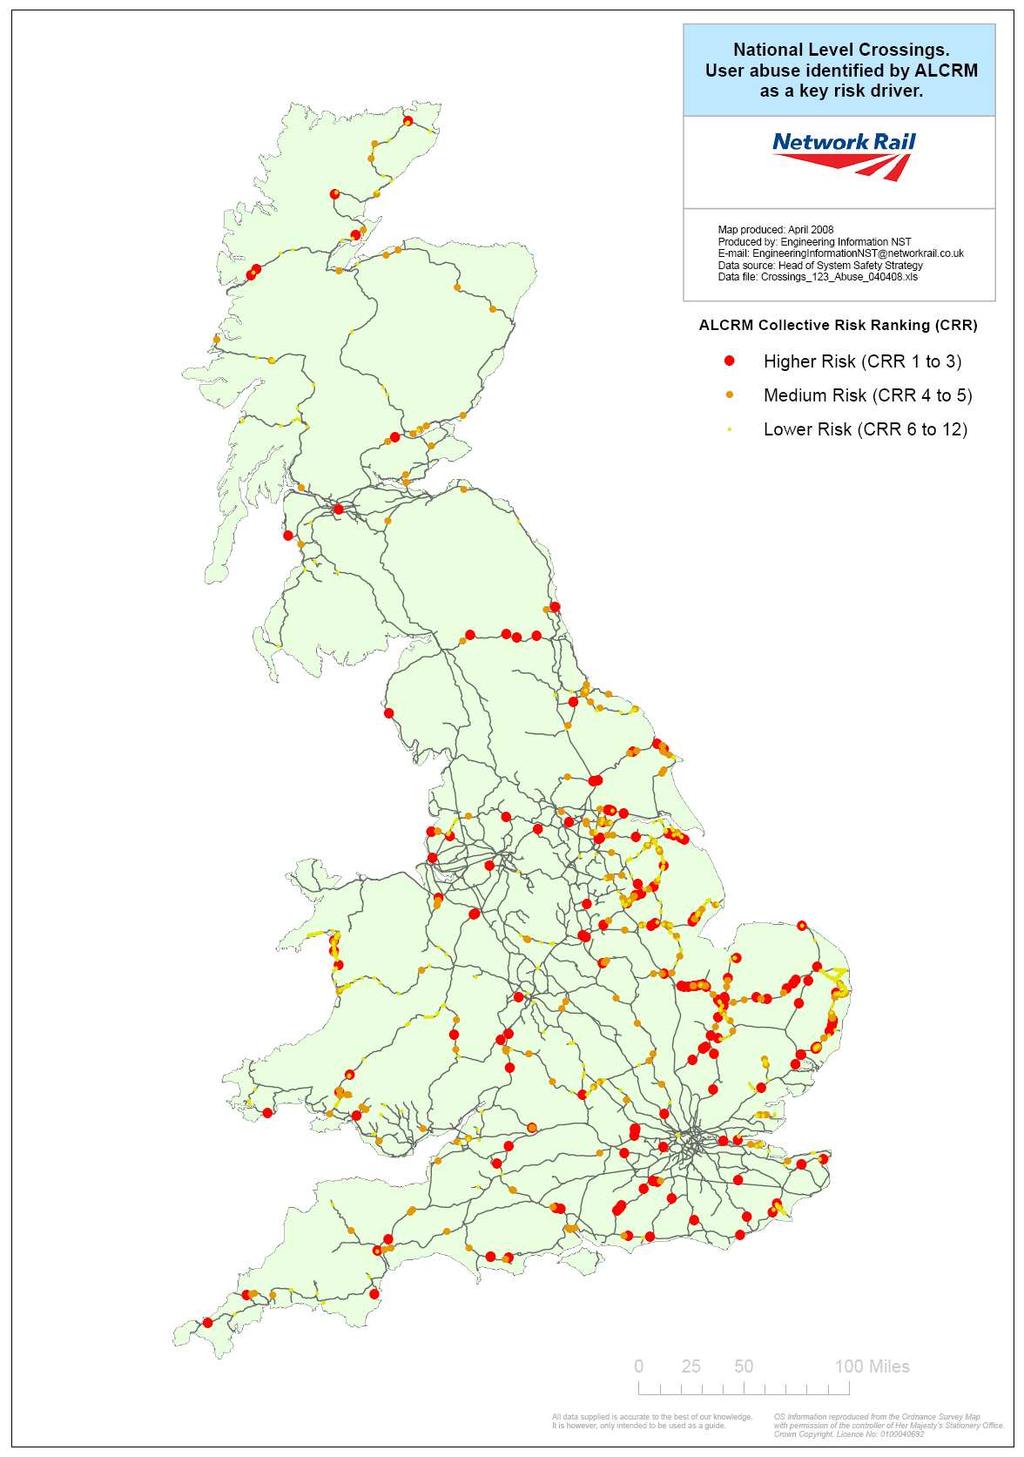 Example of Other Benefits Map produced using data extracted from the ALCRM, and geospatial mapping software showing the location of crossings that are abused and their risk